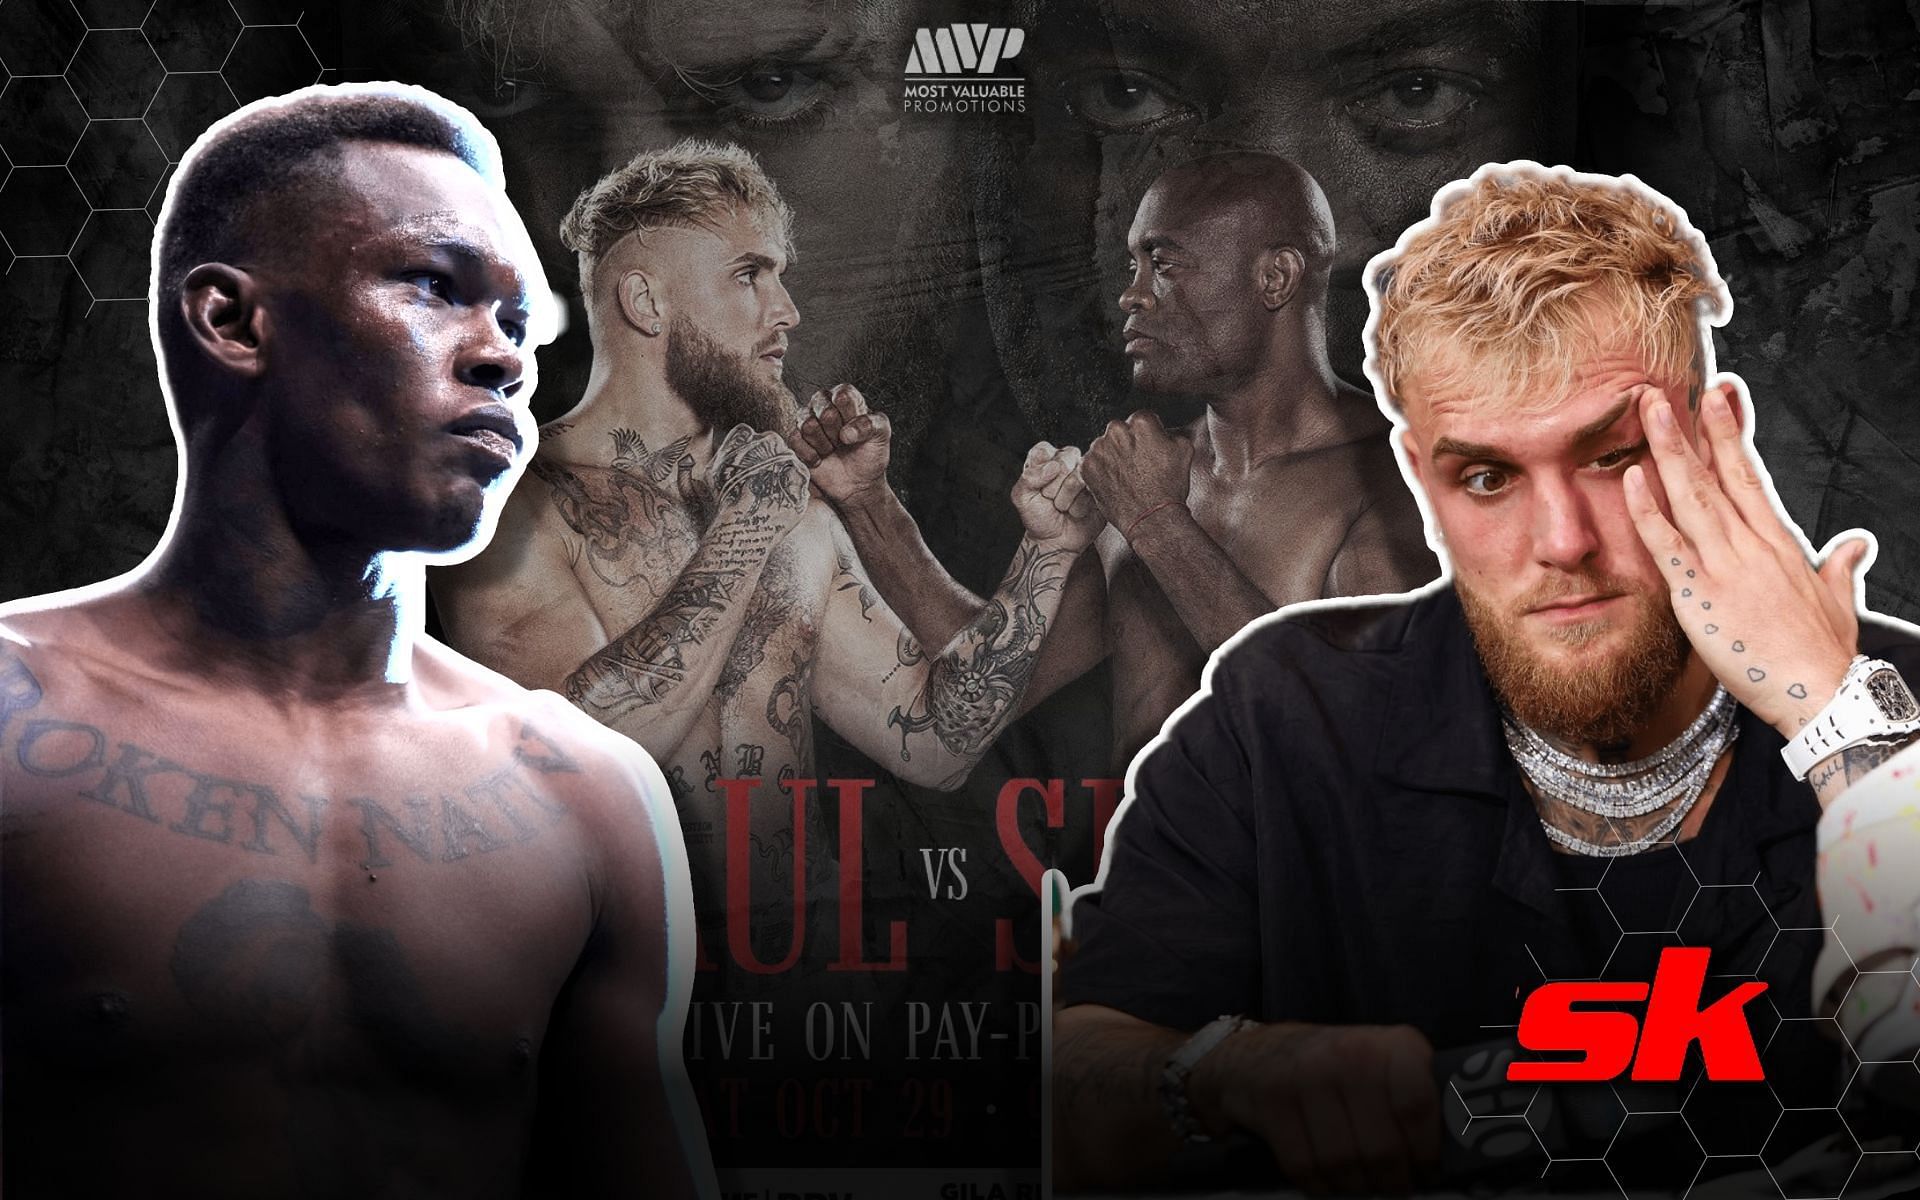  Israel Adesanya warns Jake Paul ahead of his fight with Anderson Silva. [Image credits: @TheScore on Twitter; Getty Images.]